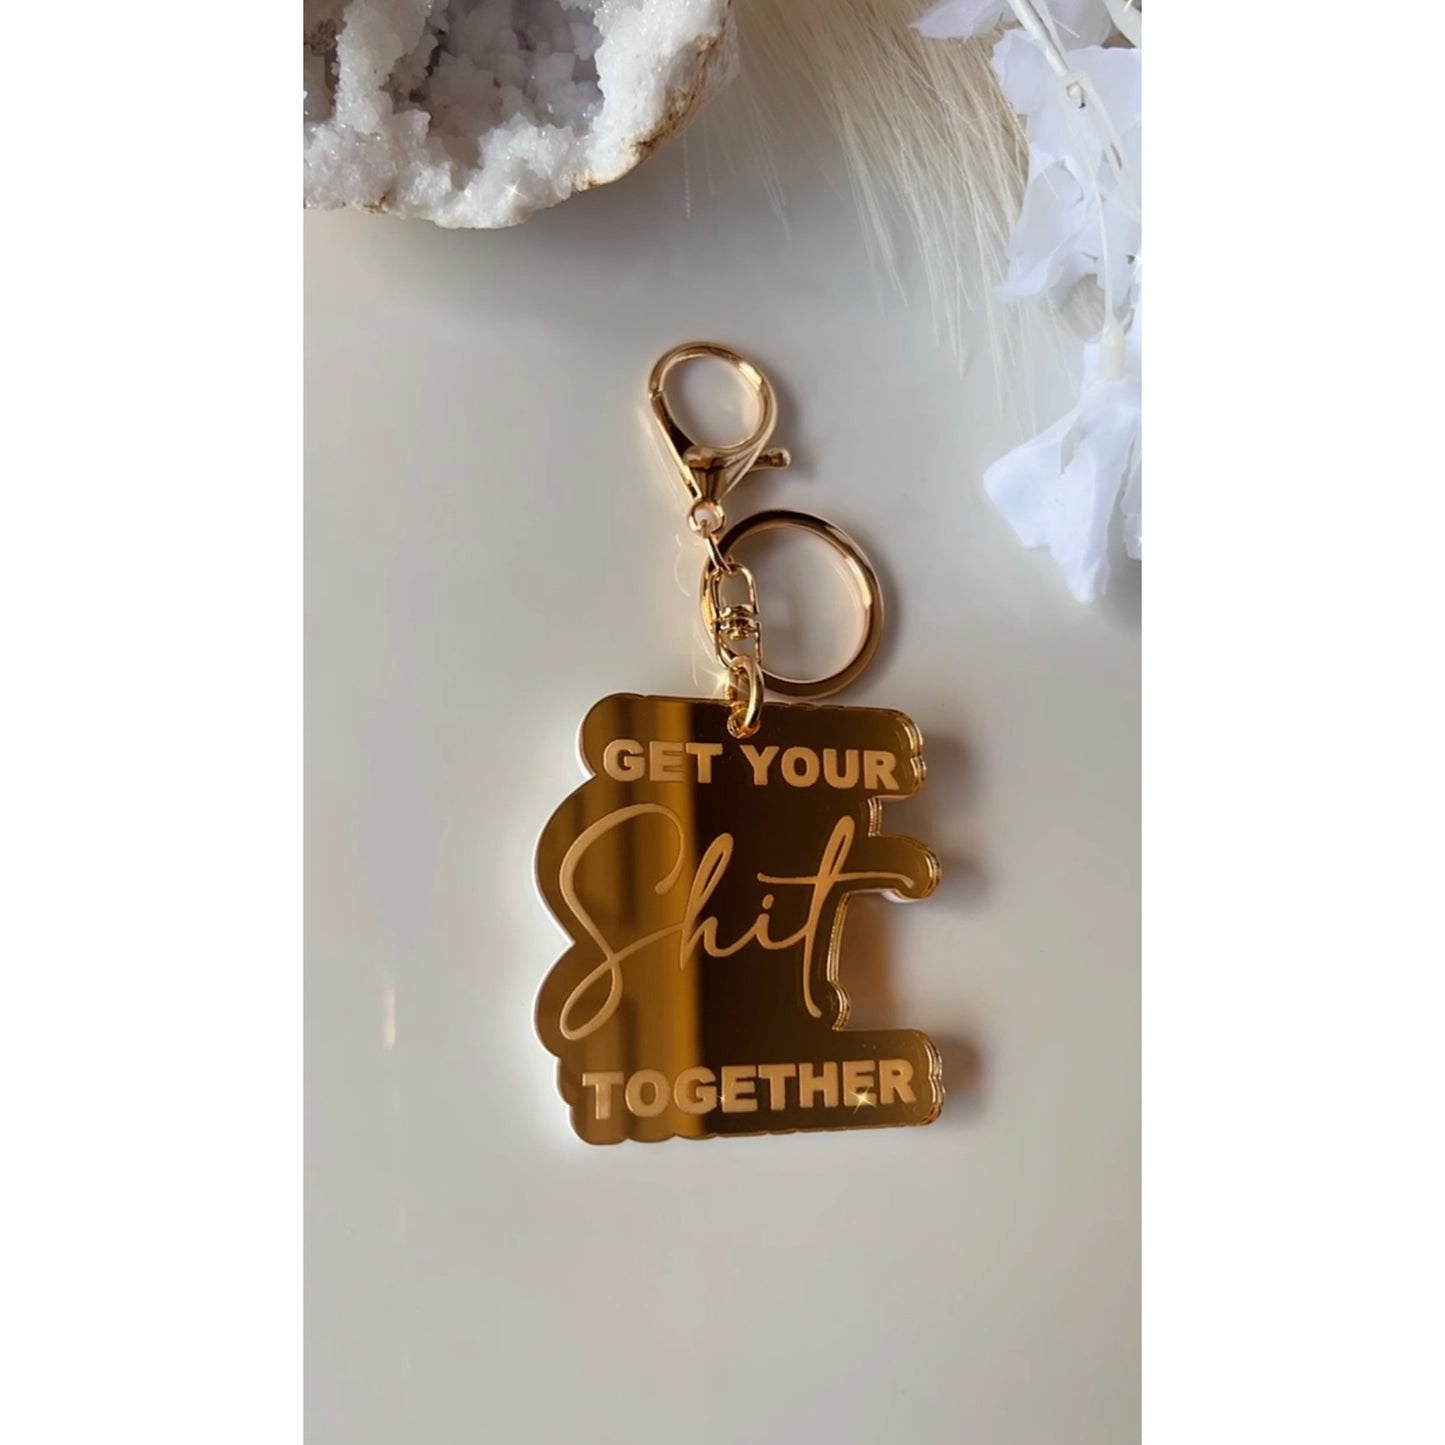 Get Your Shit Together Keychain